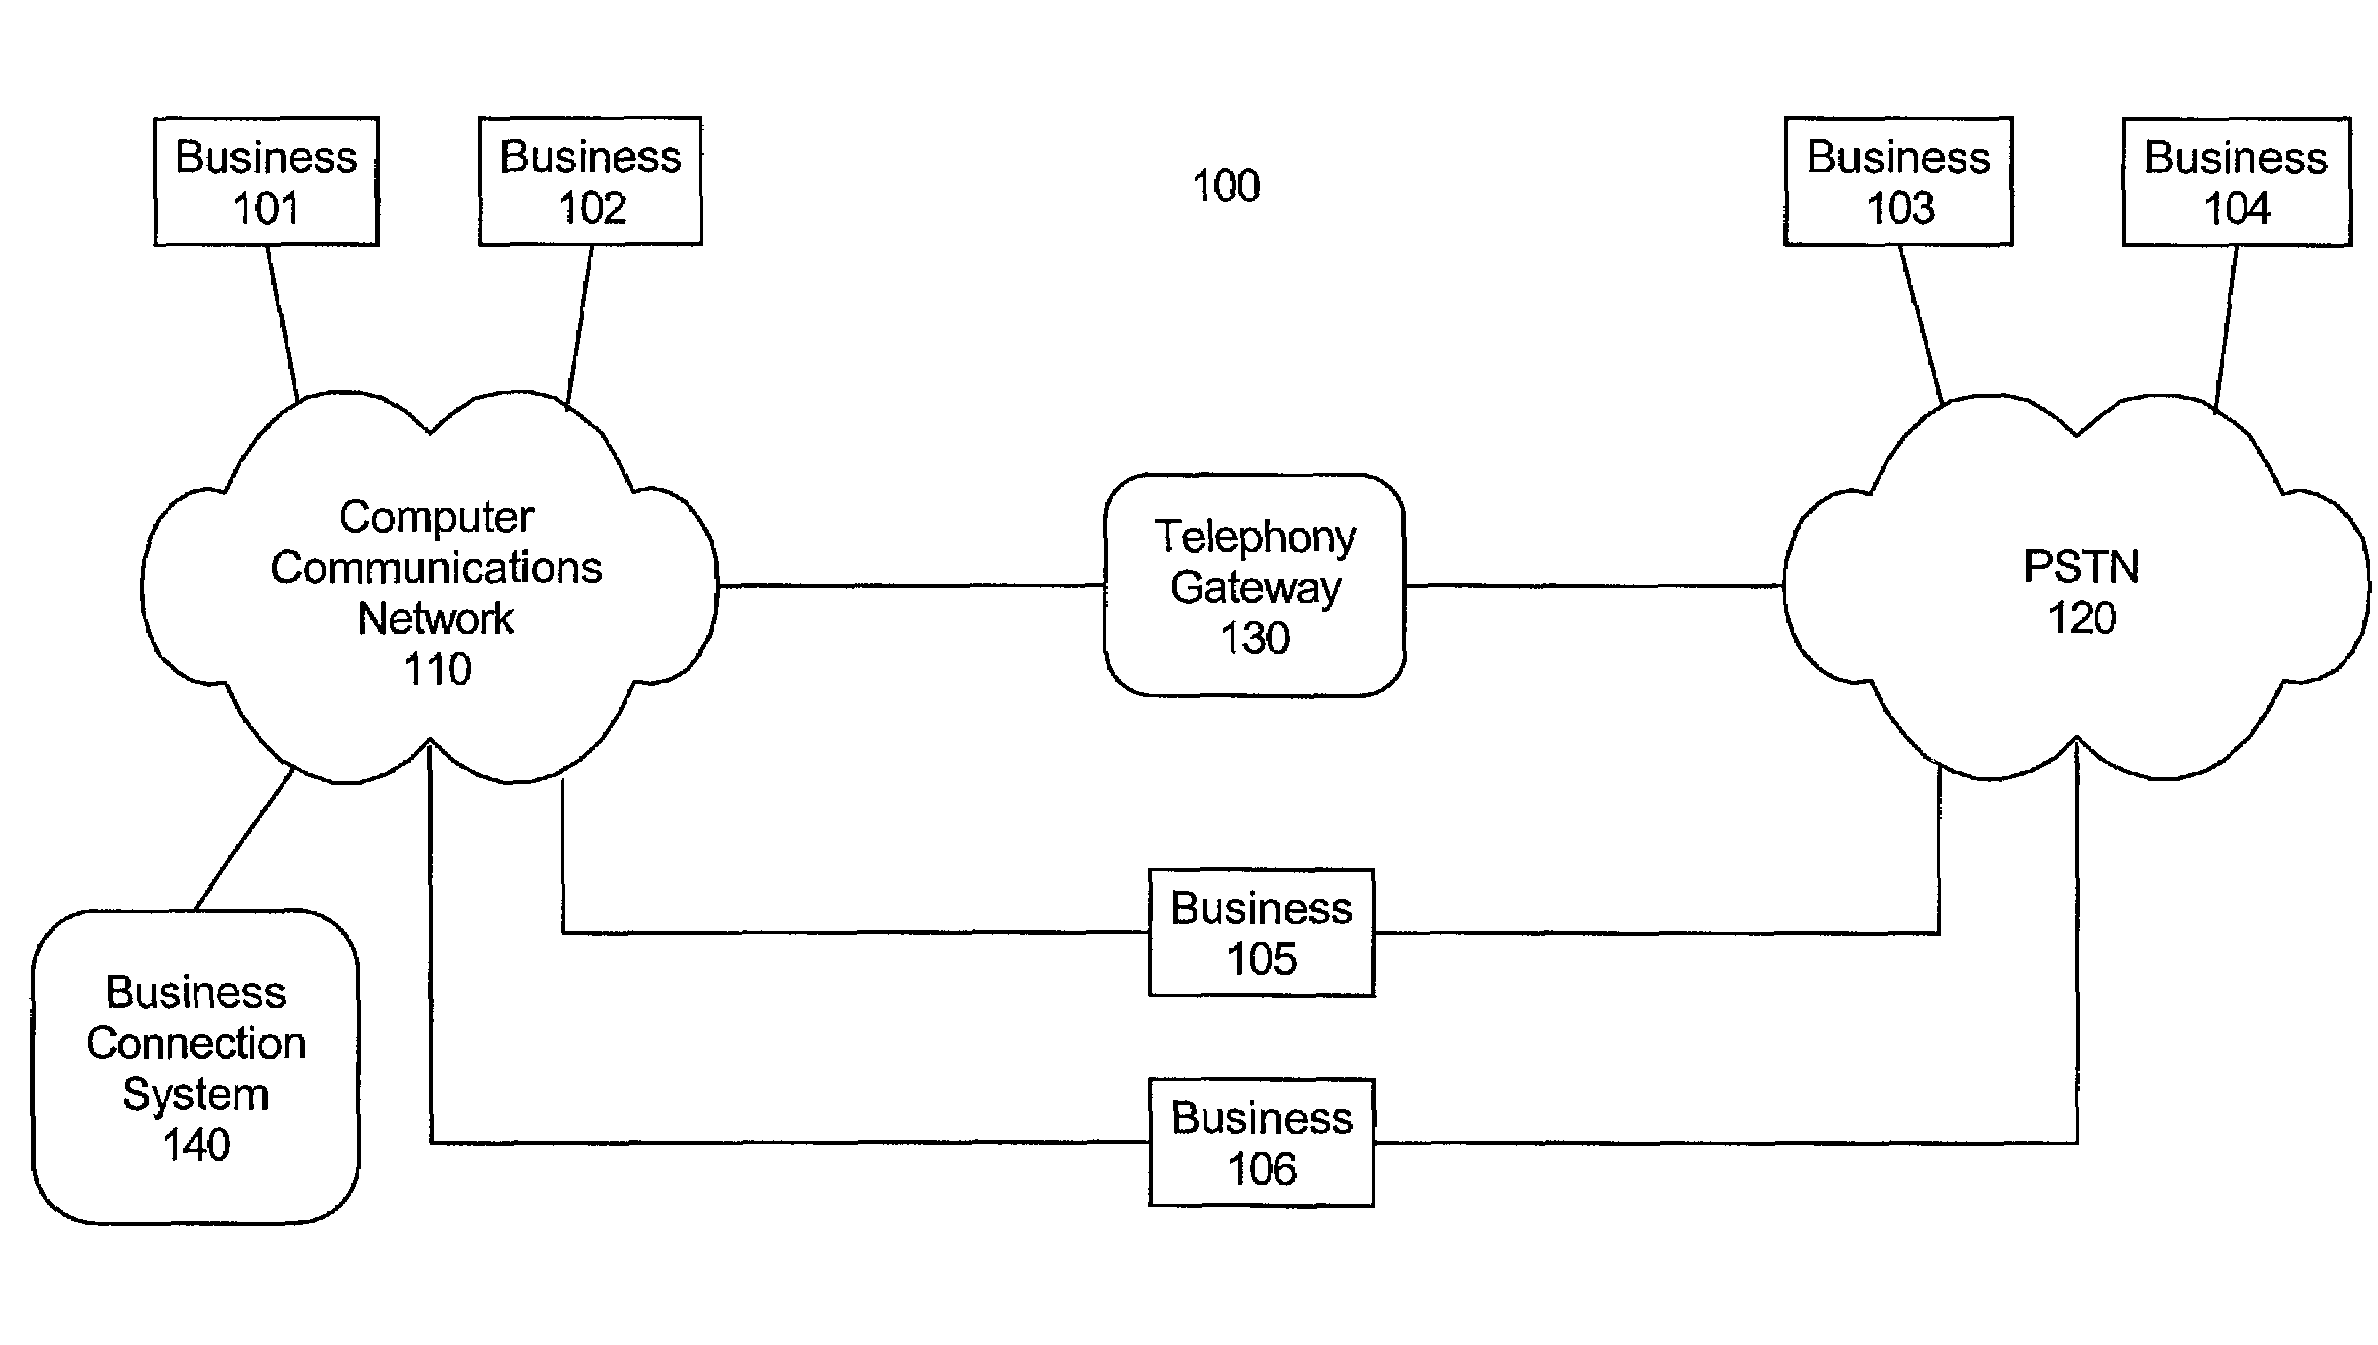 Method and system for connecting businesses through common interests